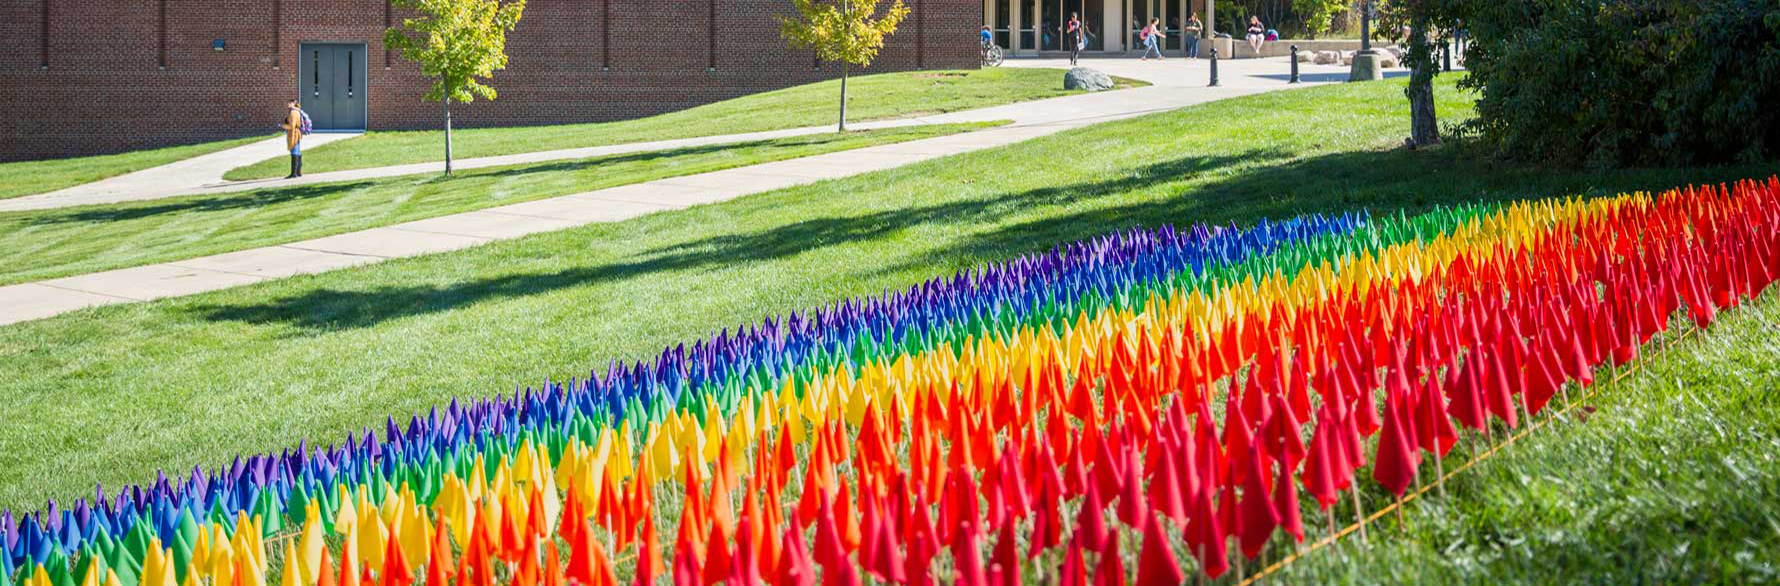 campus lawn with rainbow colored flags